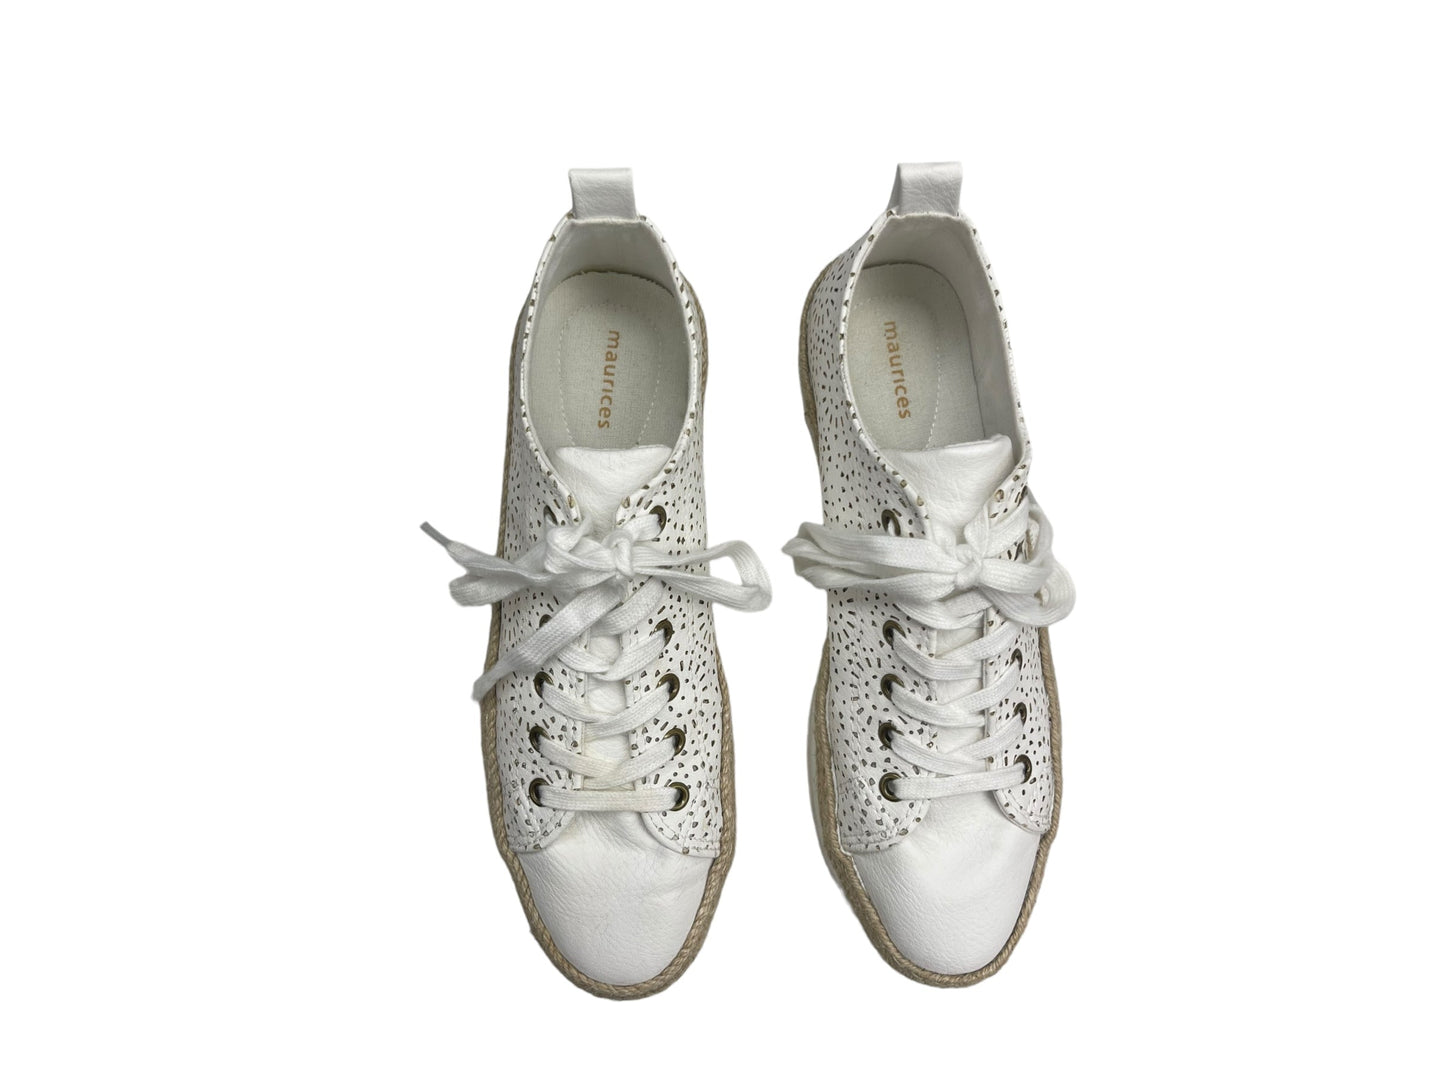 White Shoes Sneakers Maurices, Size 9